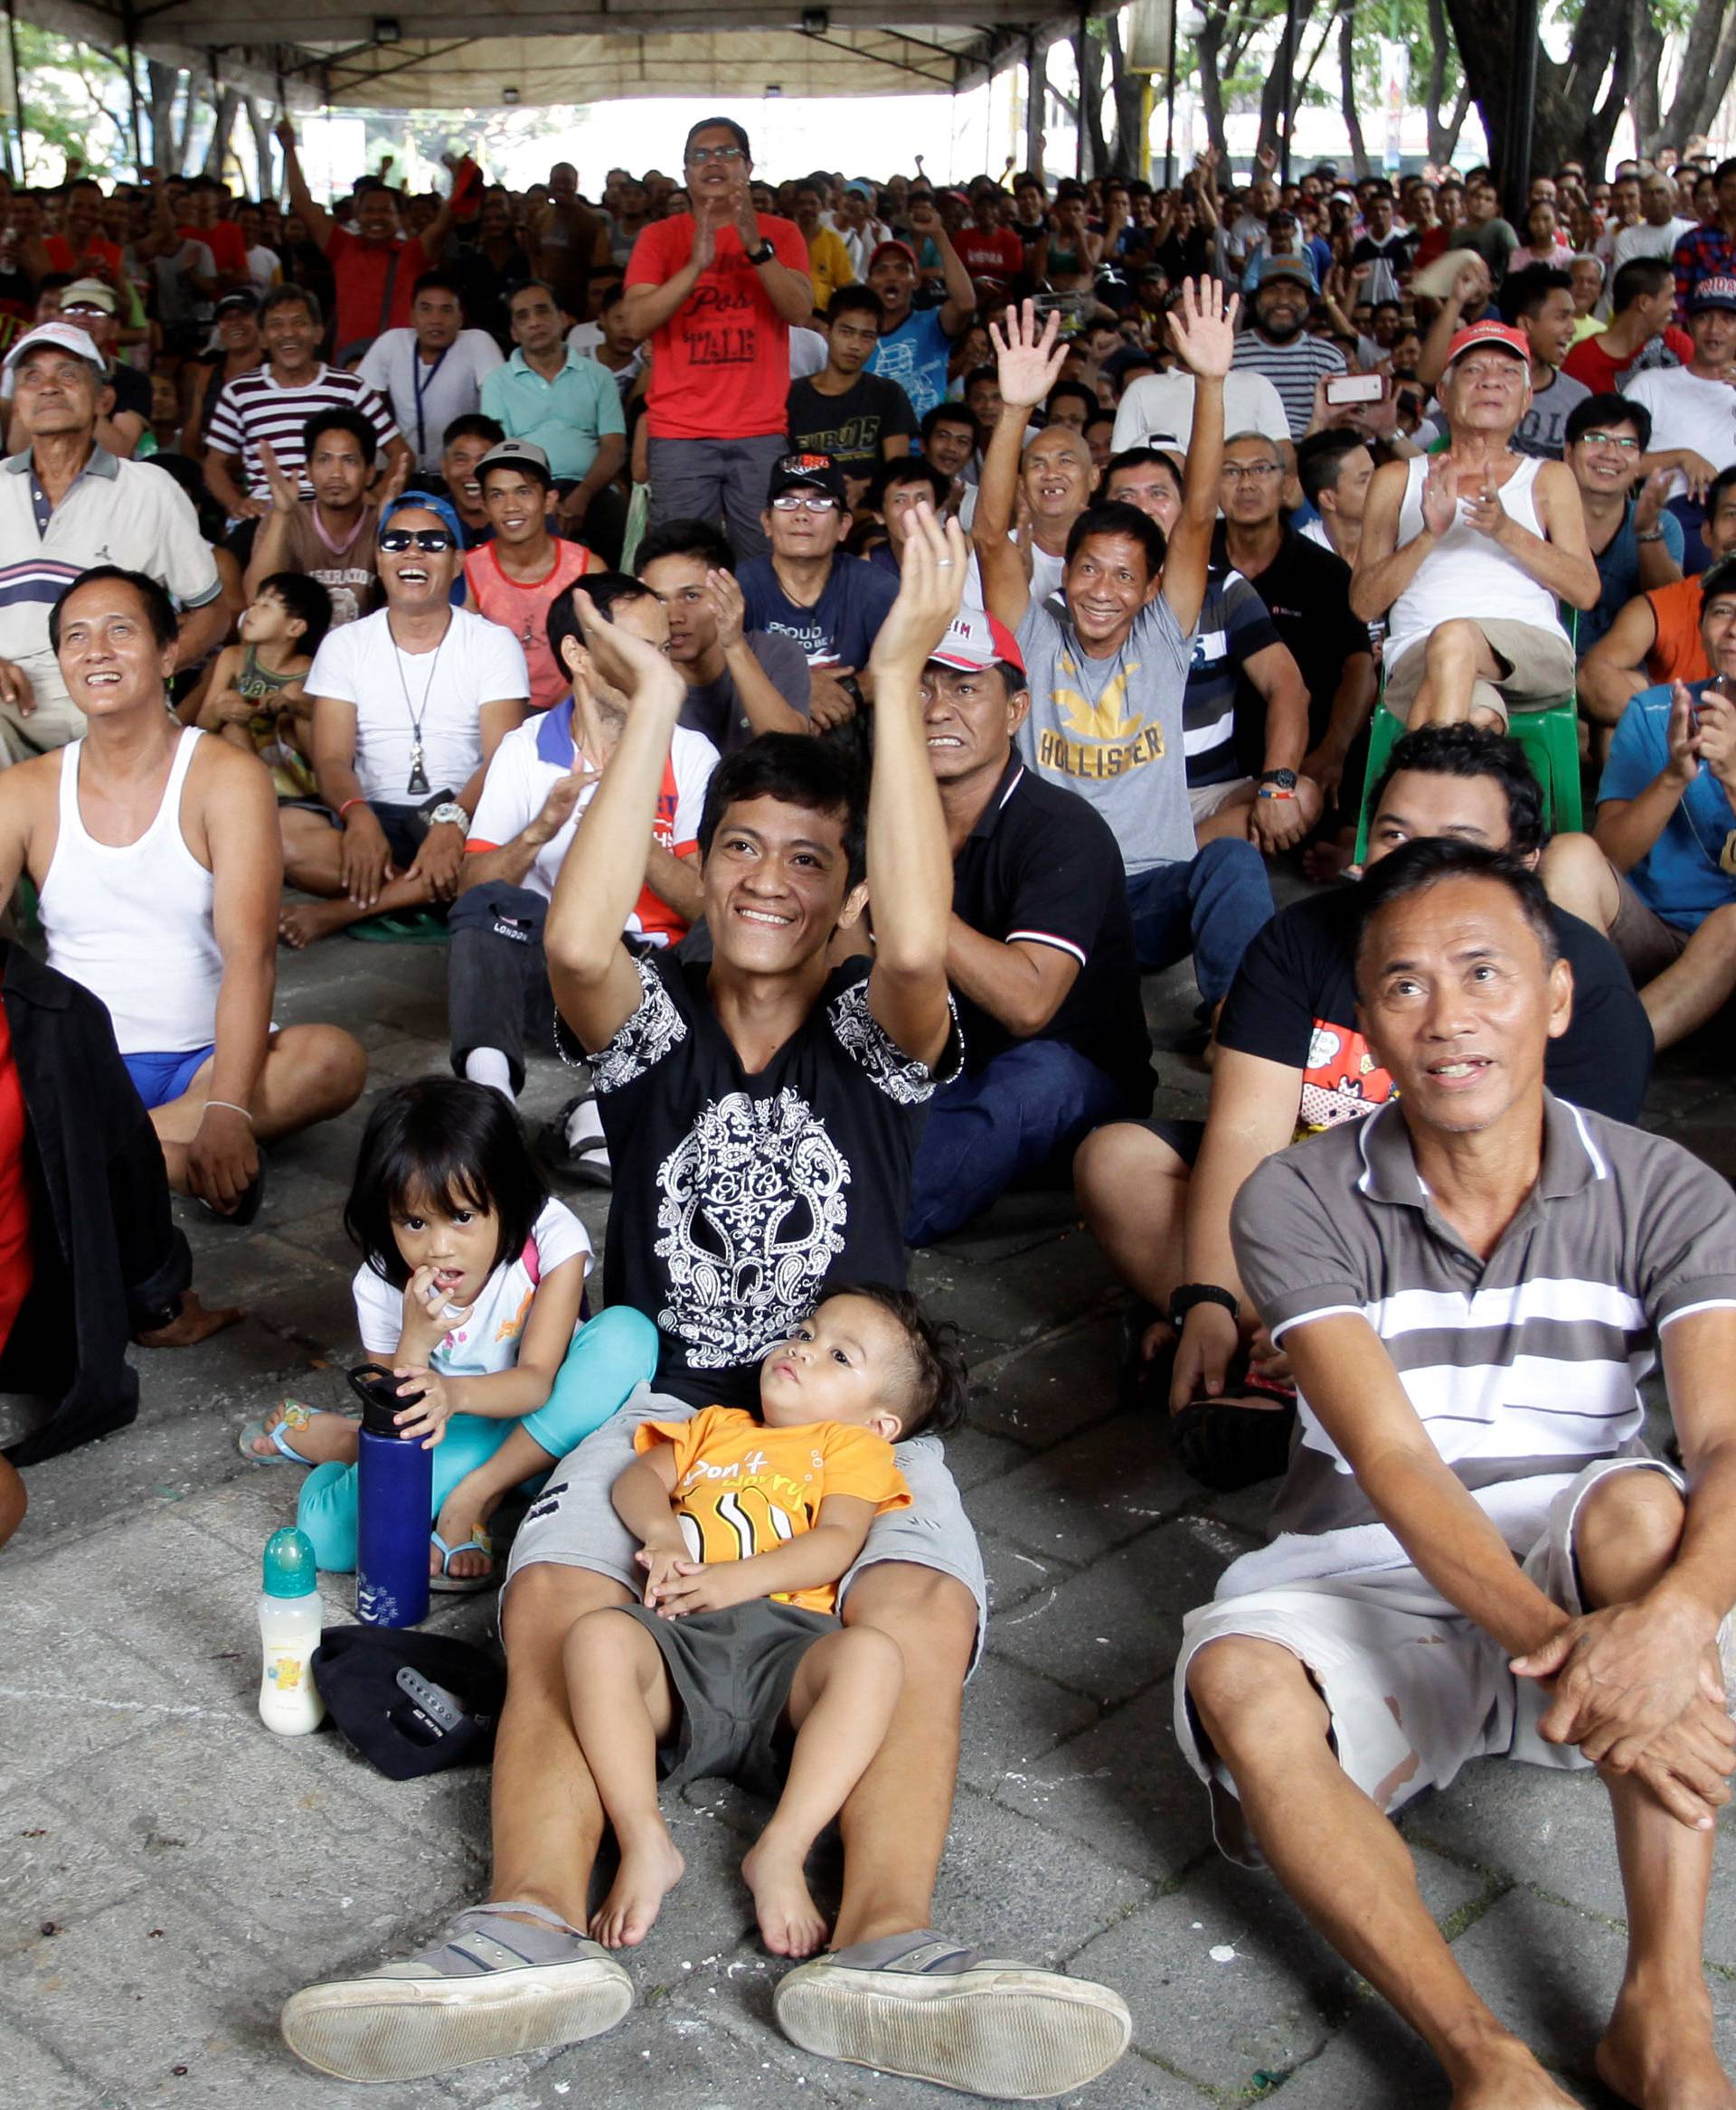 Fans cheer as they watch a public screening of the WBO welterweight title boxing match between Manny Pacquiao and Jessie Vargas, in Marikina